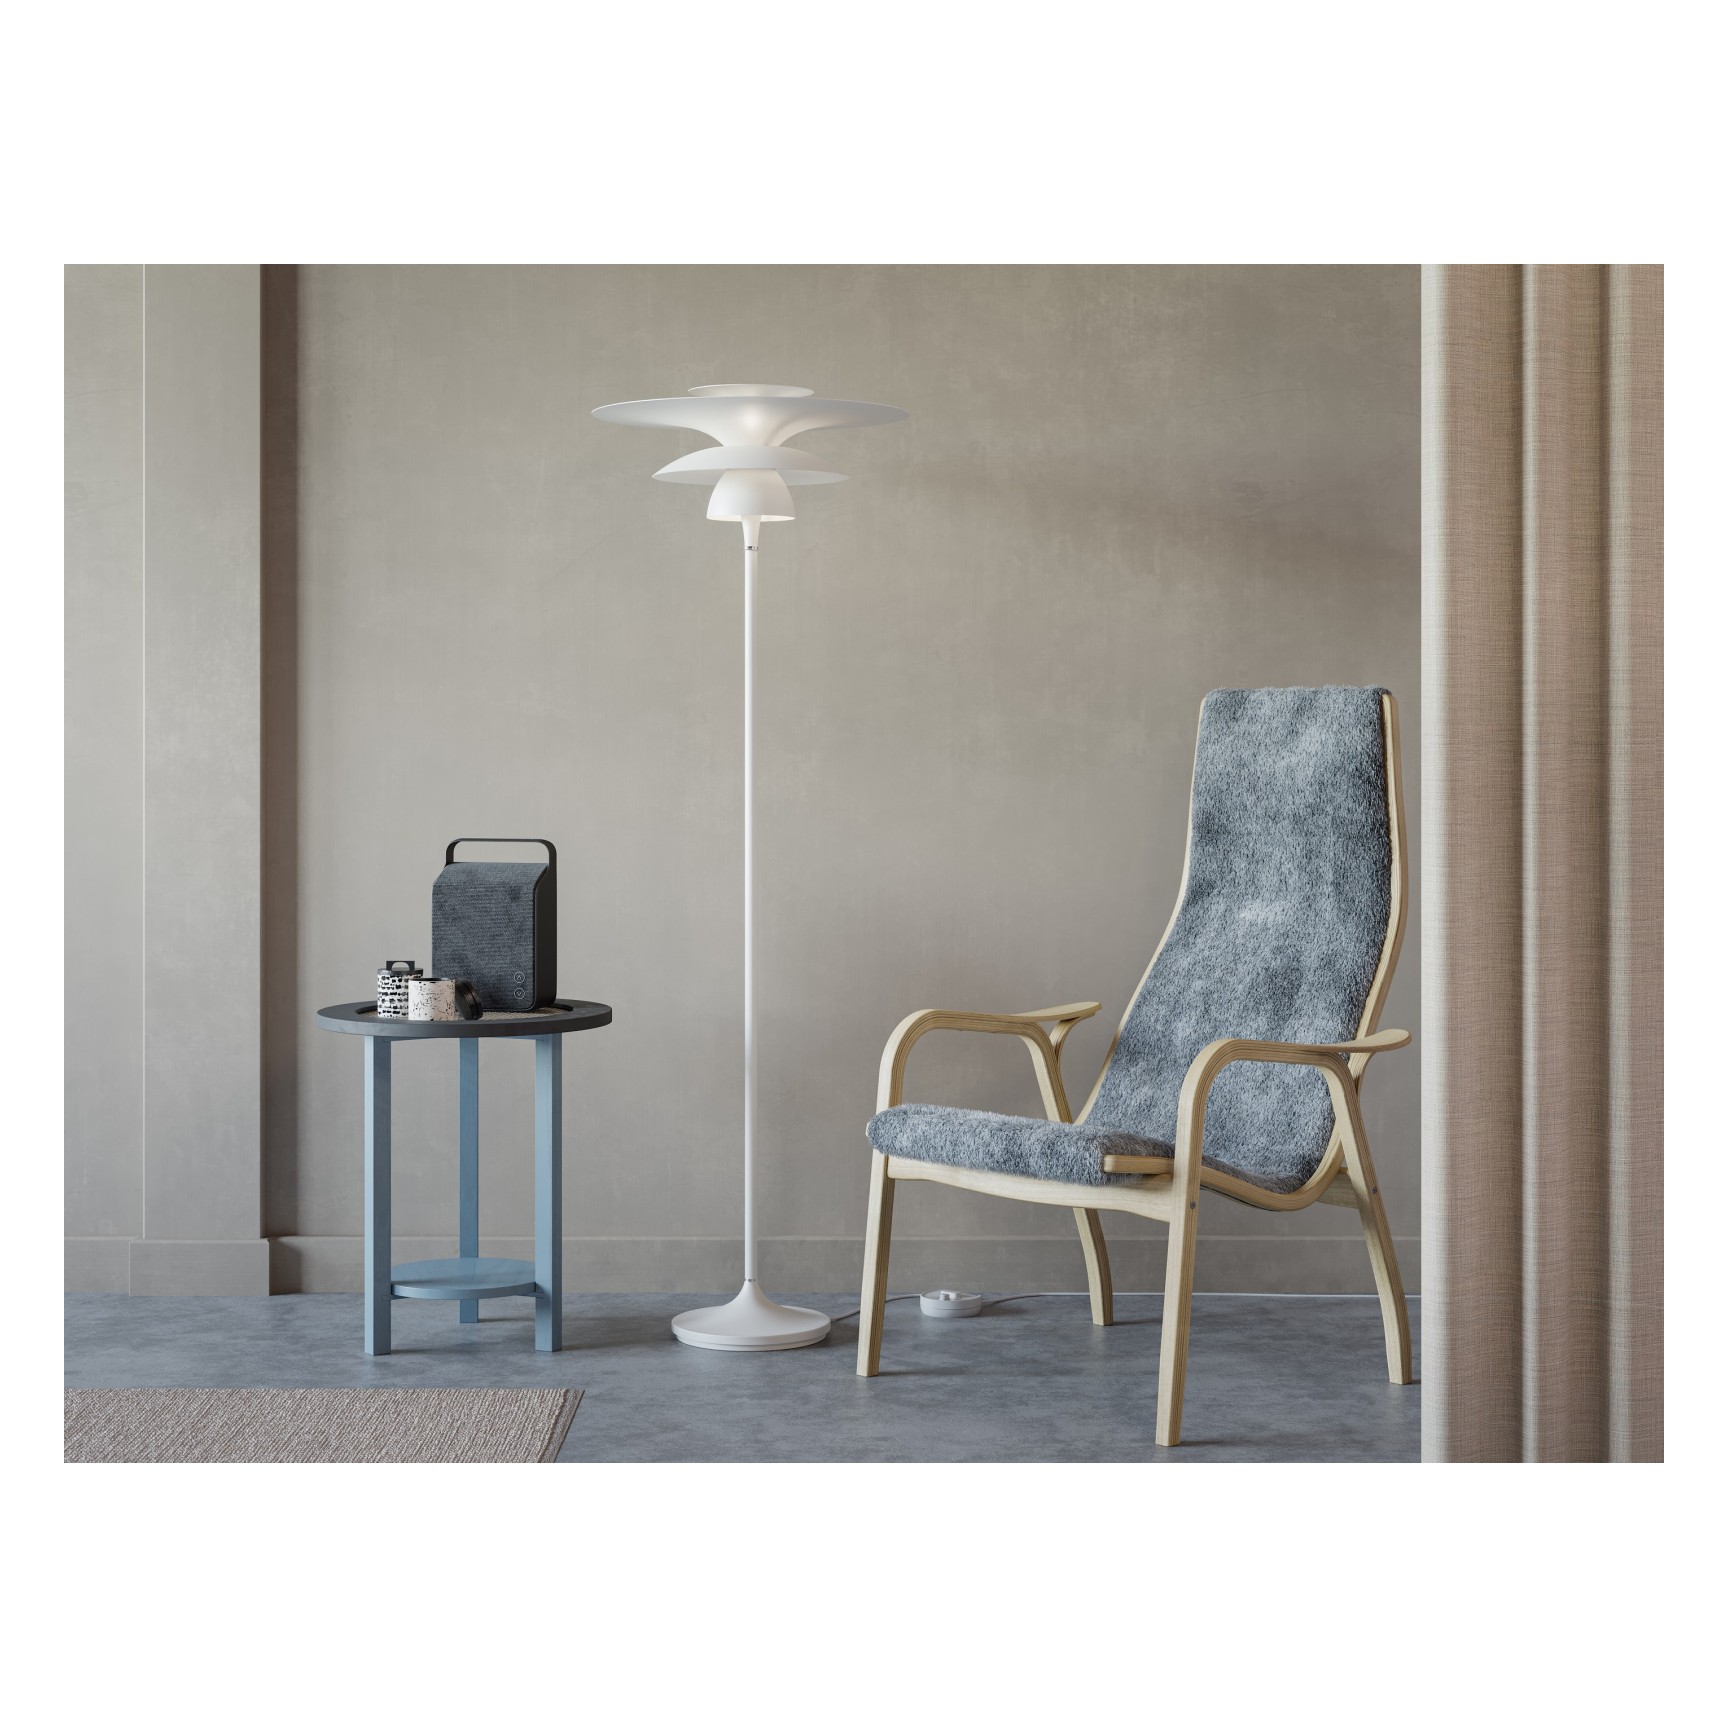 PICASSO GOLVLAMPA D500 OXID